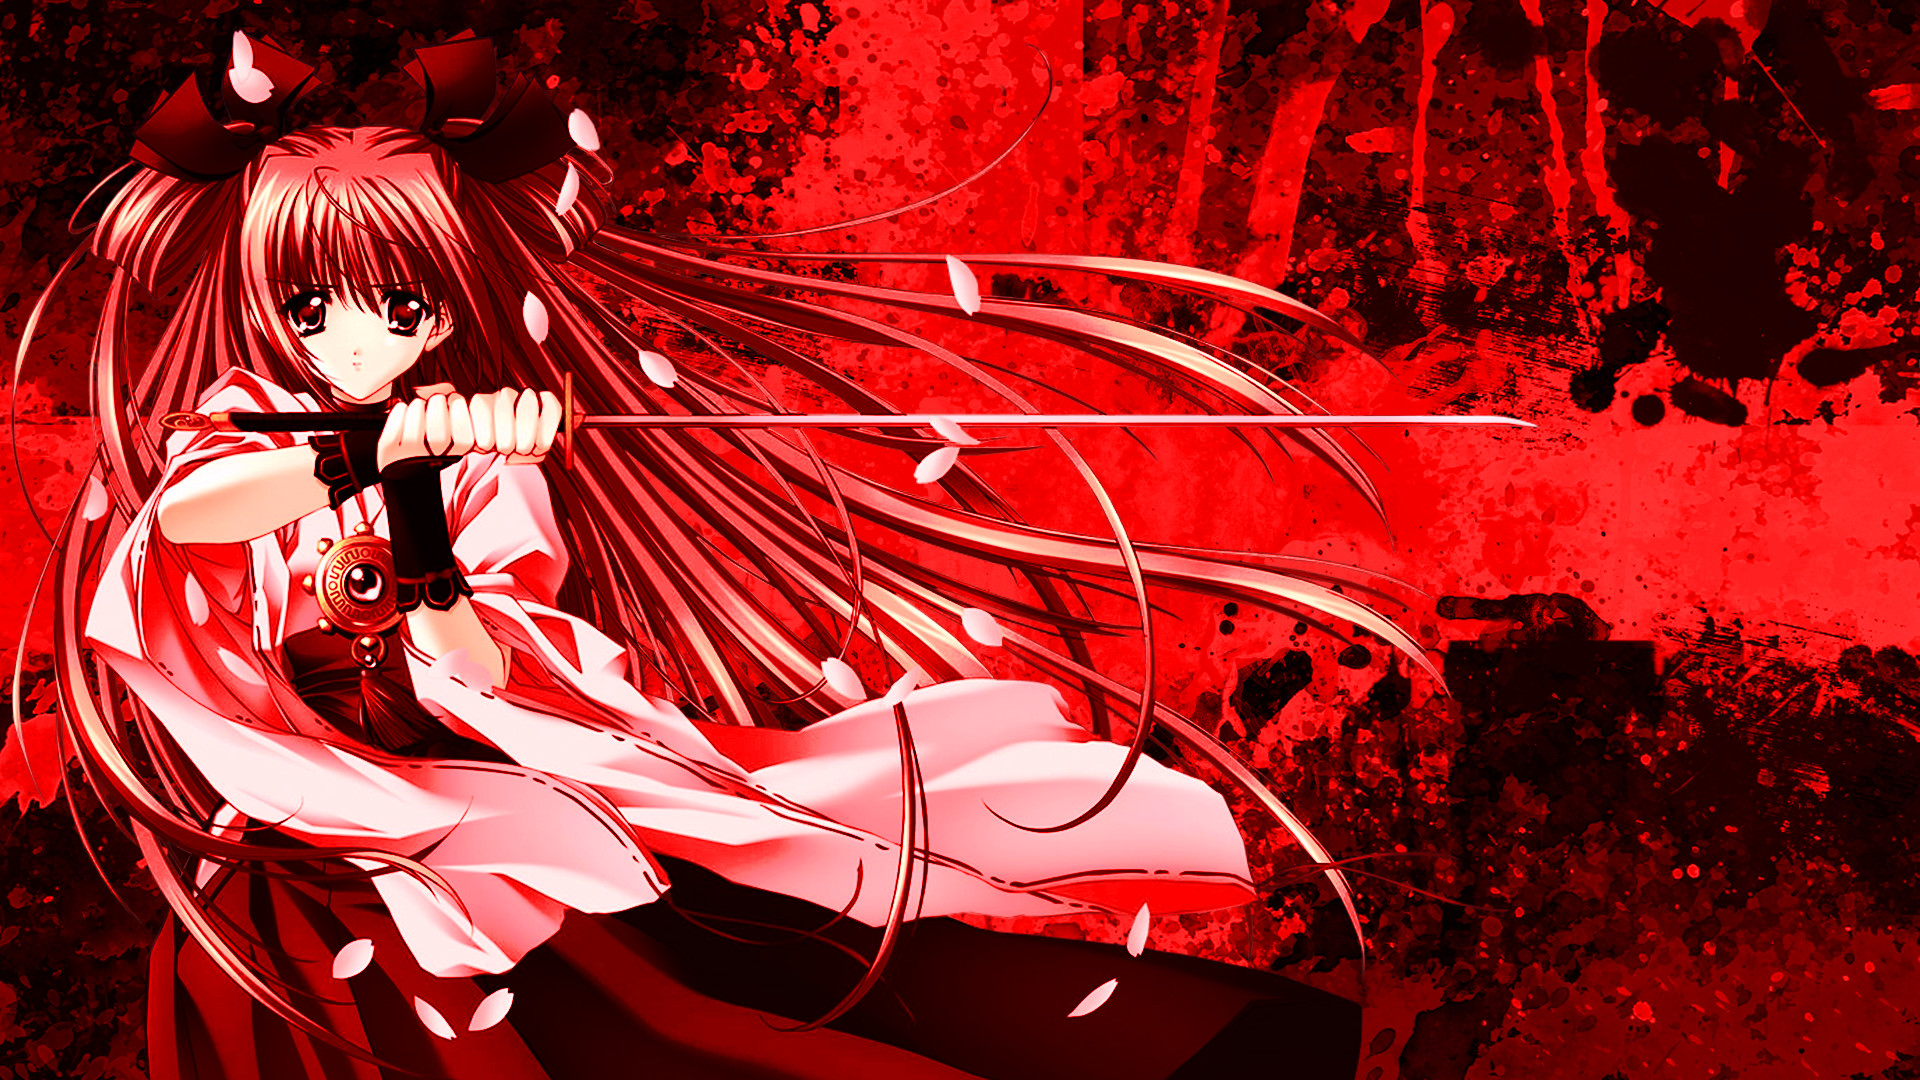 1920x1080 Anime - Unknown Woman Warrior Sword Red Eyes Red Hair Long Hair Anime Girl  Wallpaper